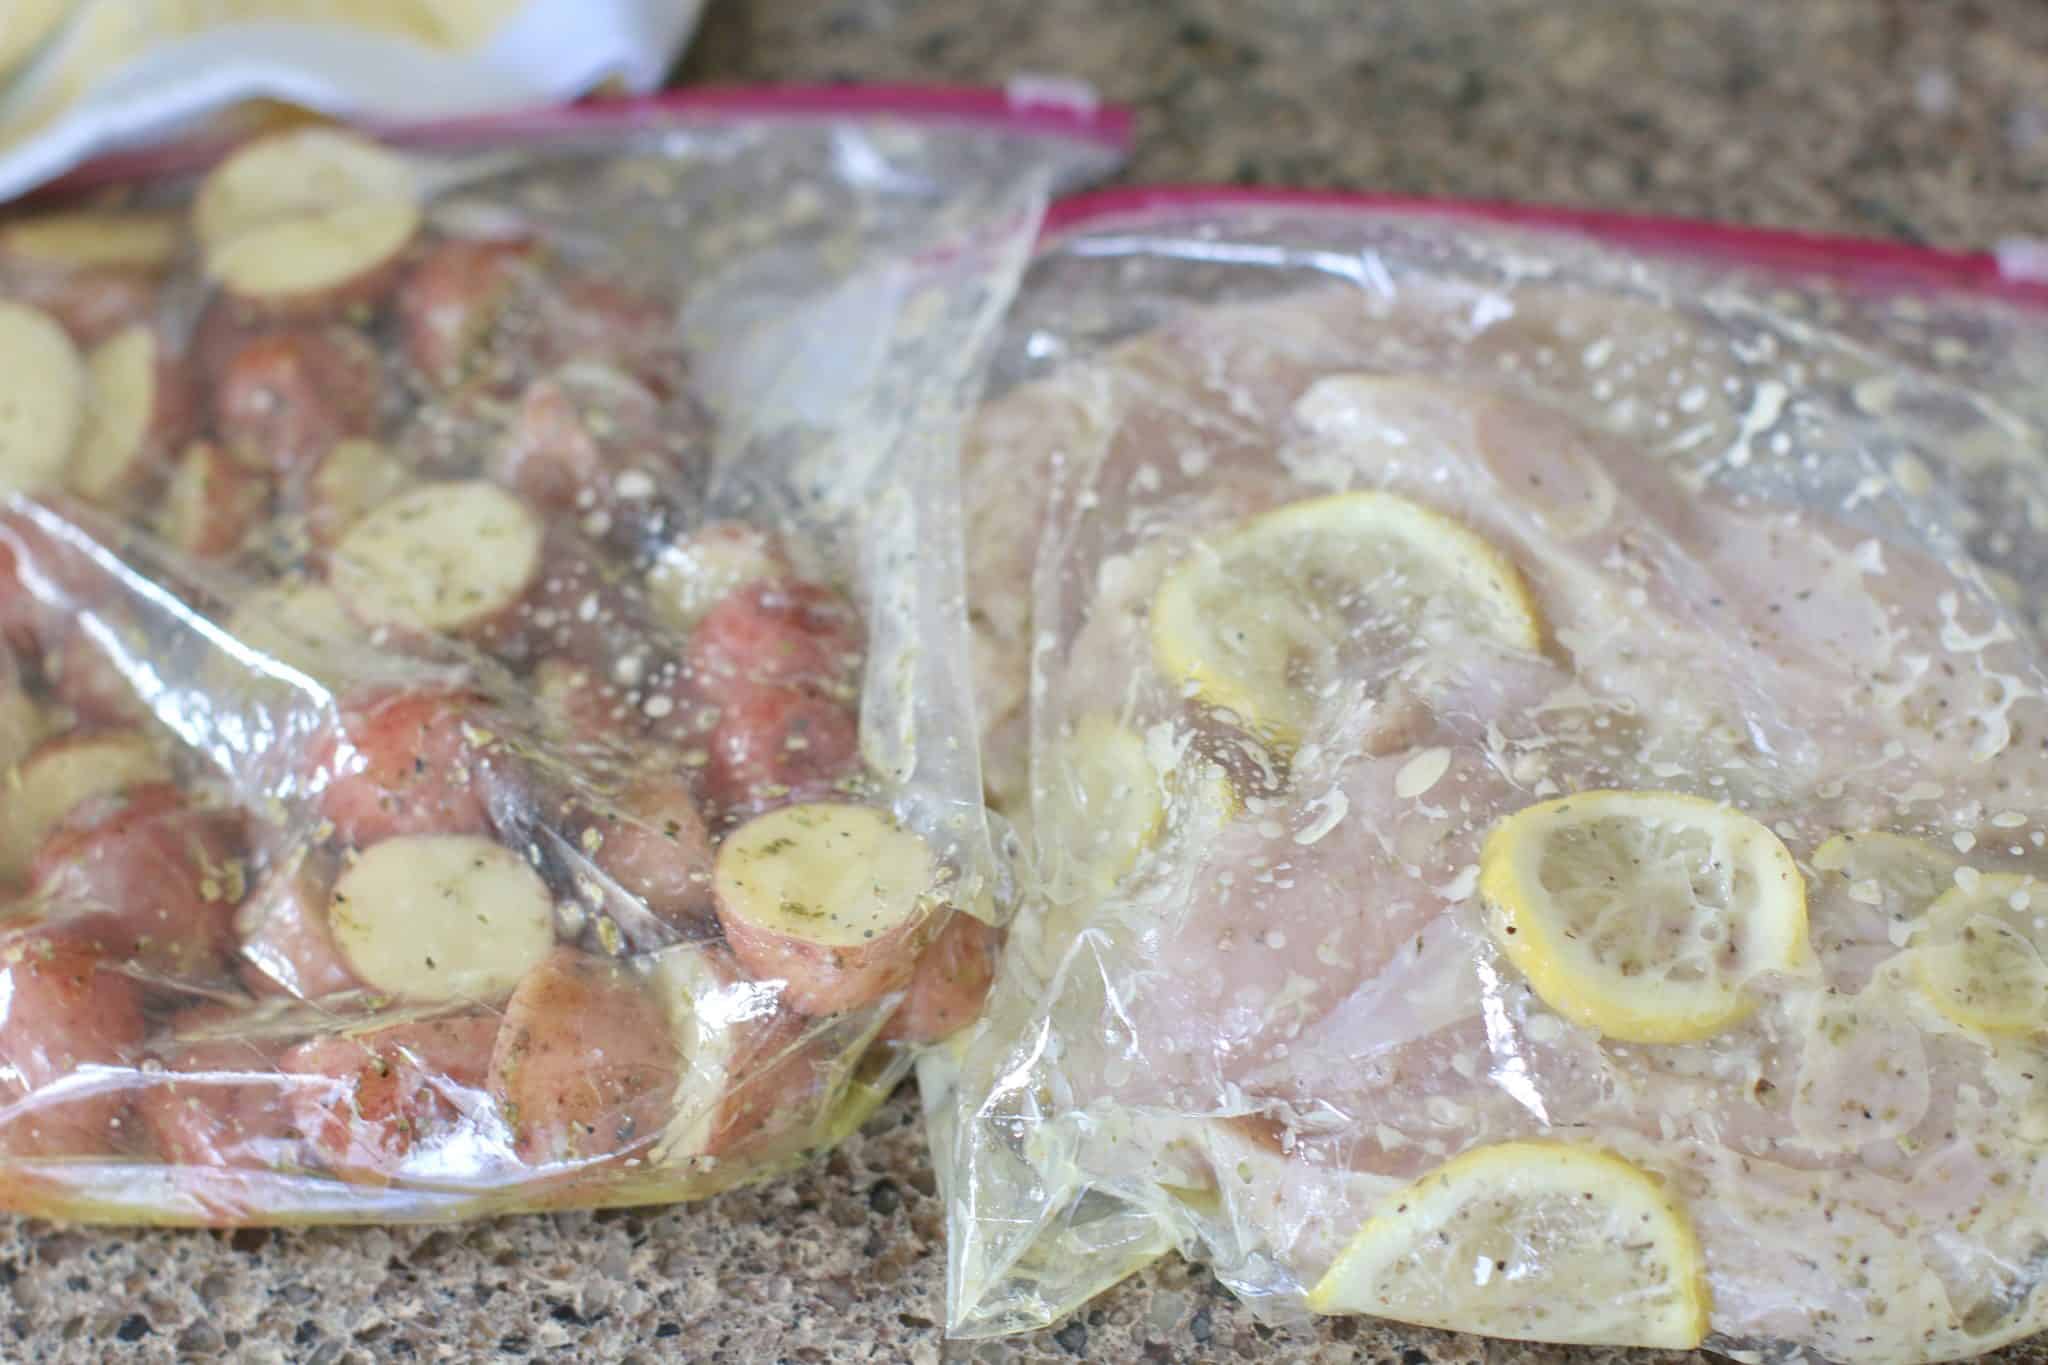 marinade shown fully saturating chicken breasts and potatoes in zip top bags.